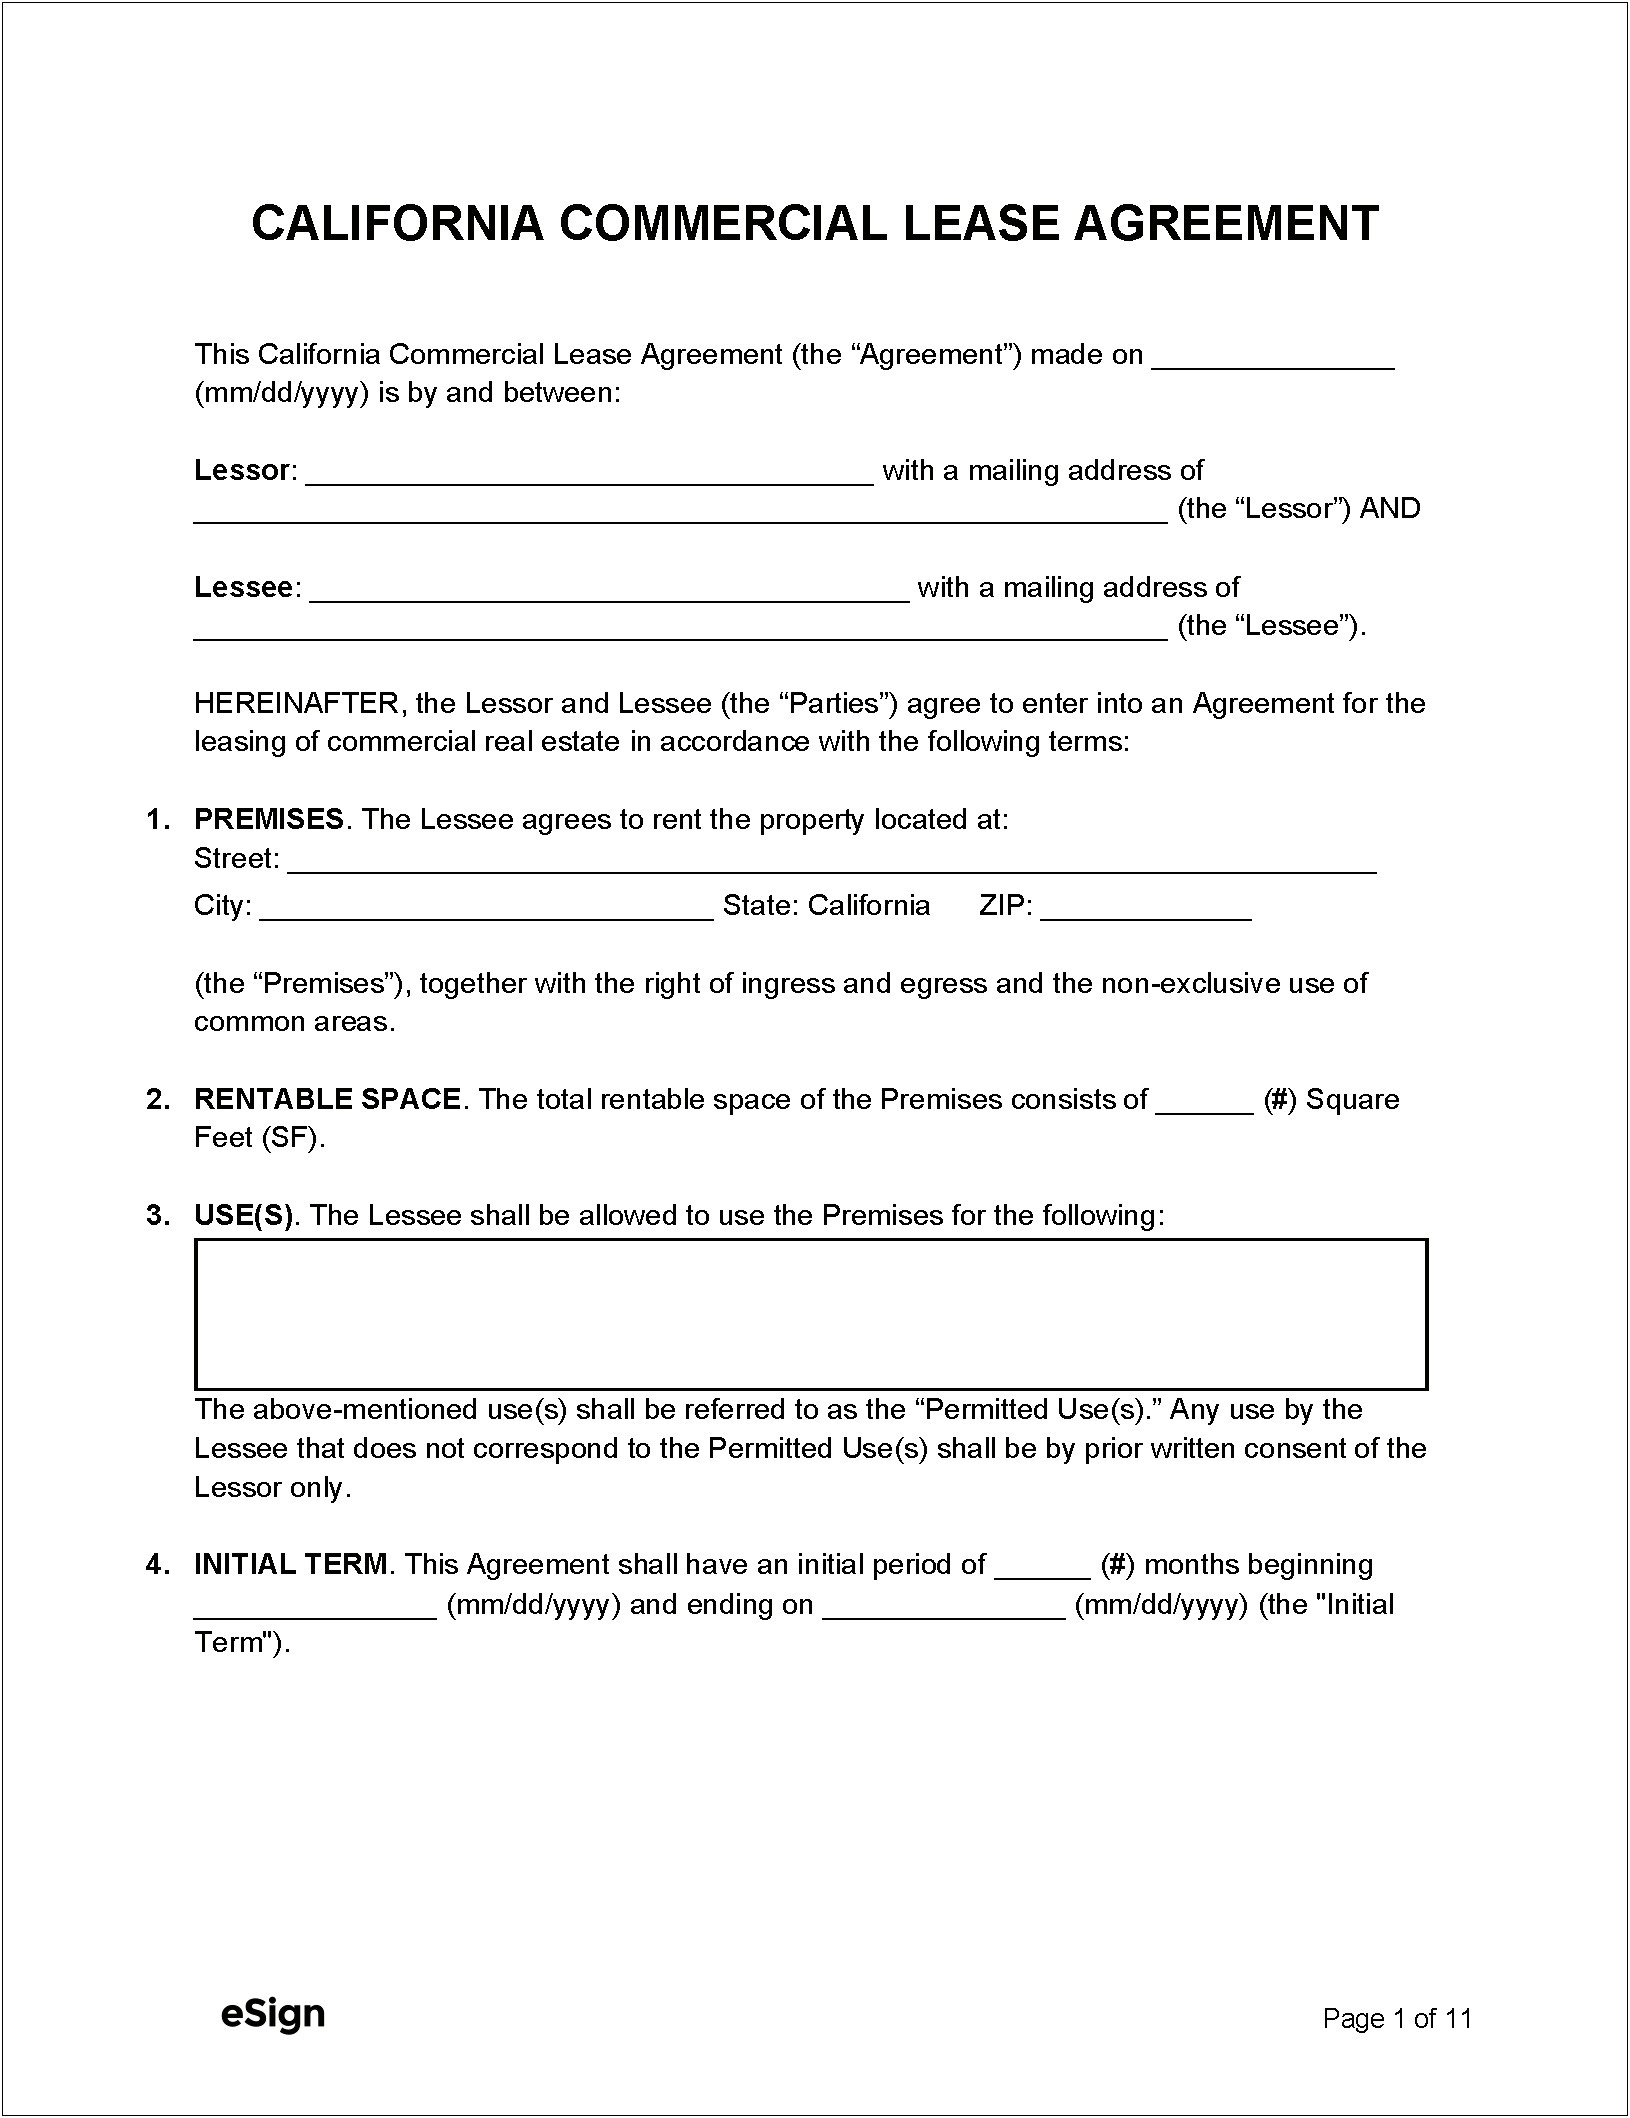 California Commercial Lease Agreement Template For Word